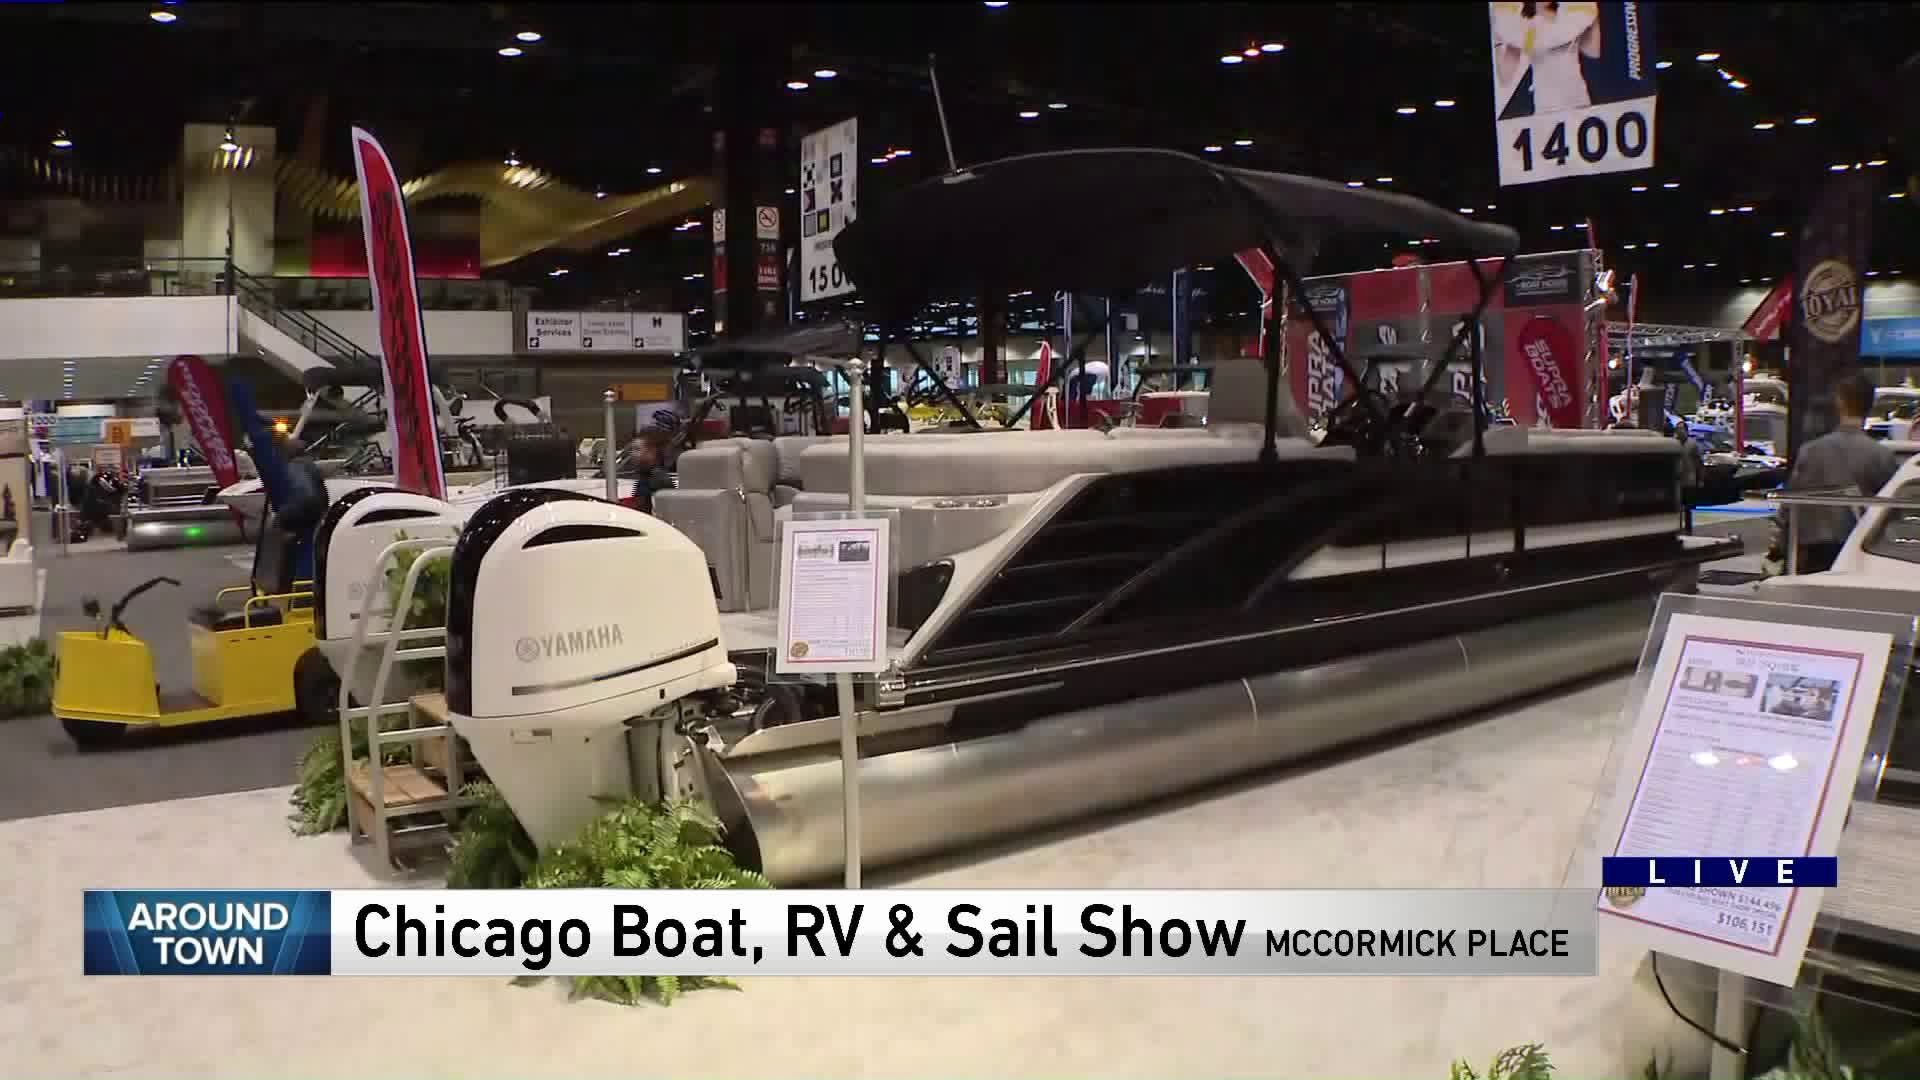 Around Town visits the Chicago Boat, RV & Sail Show